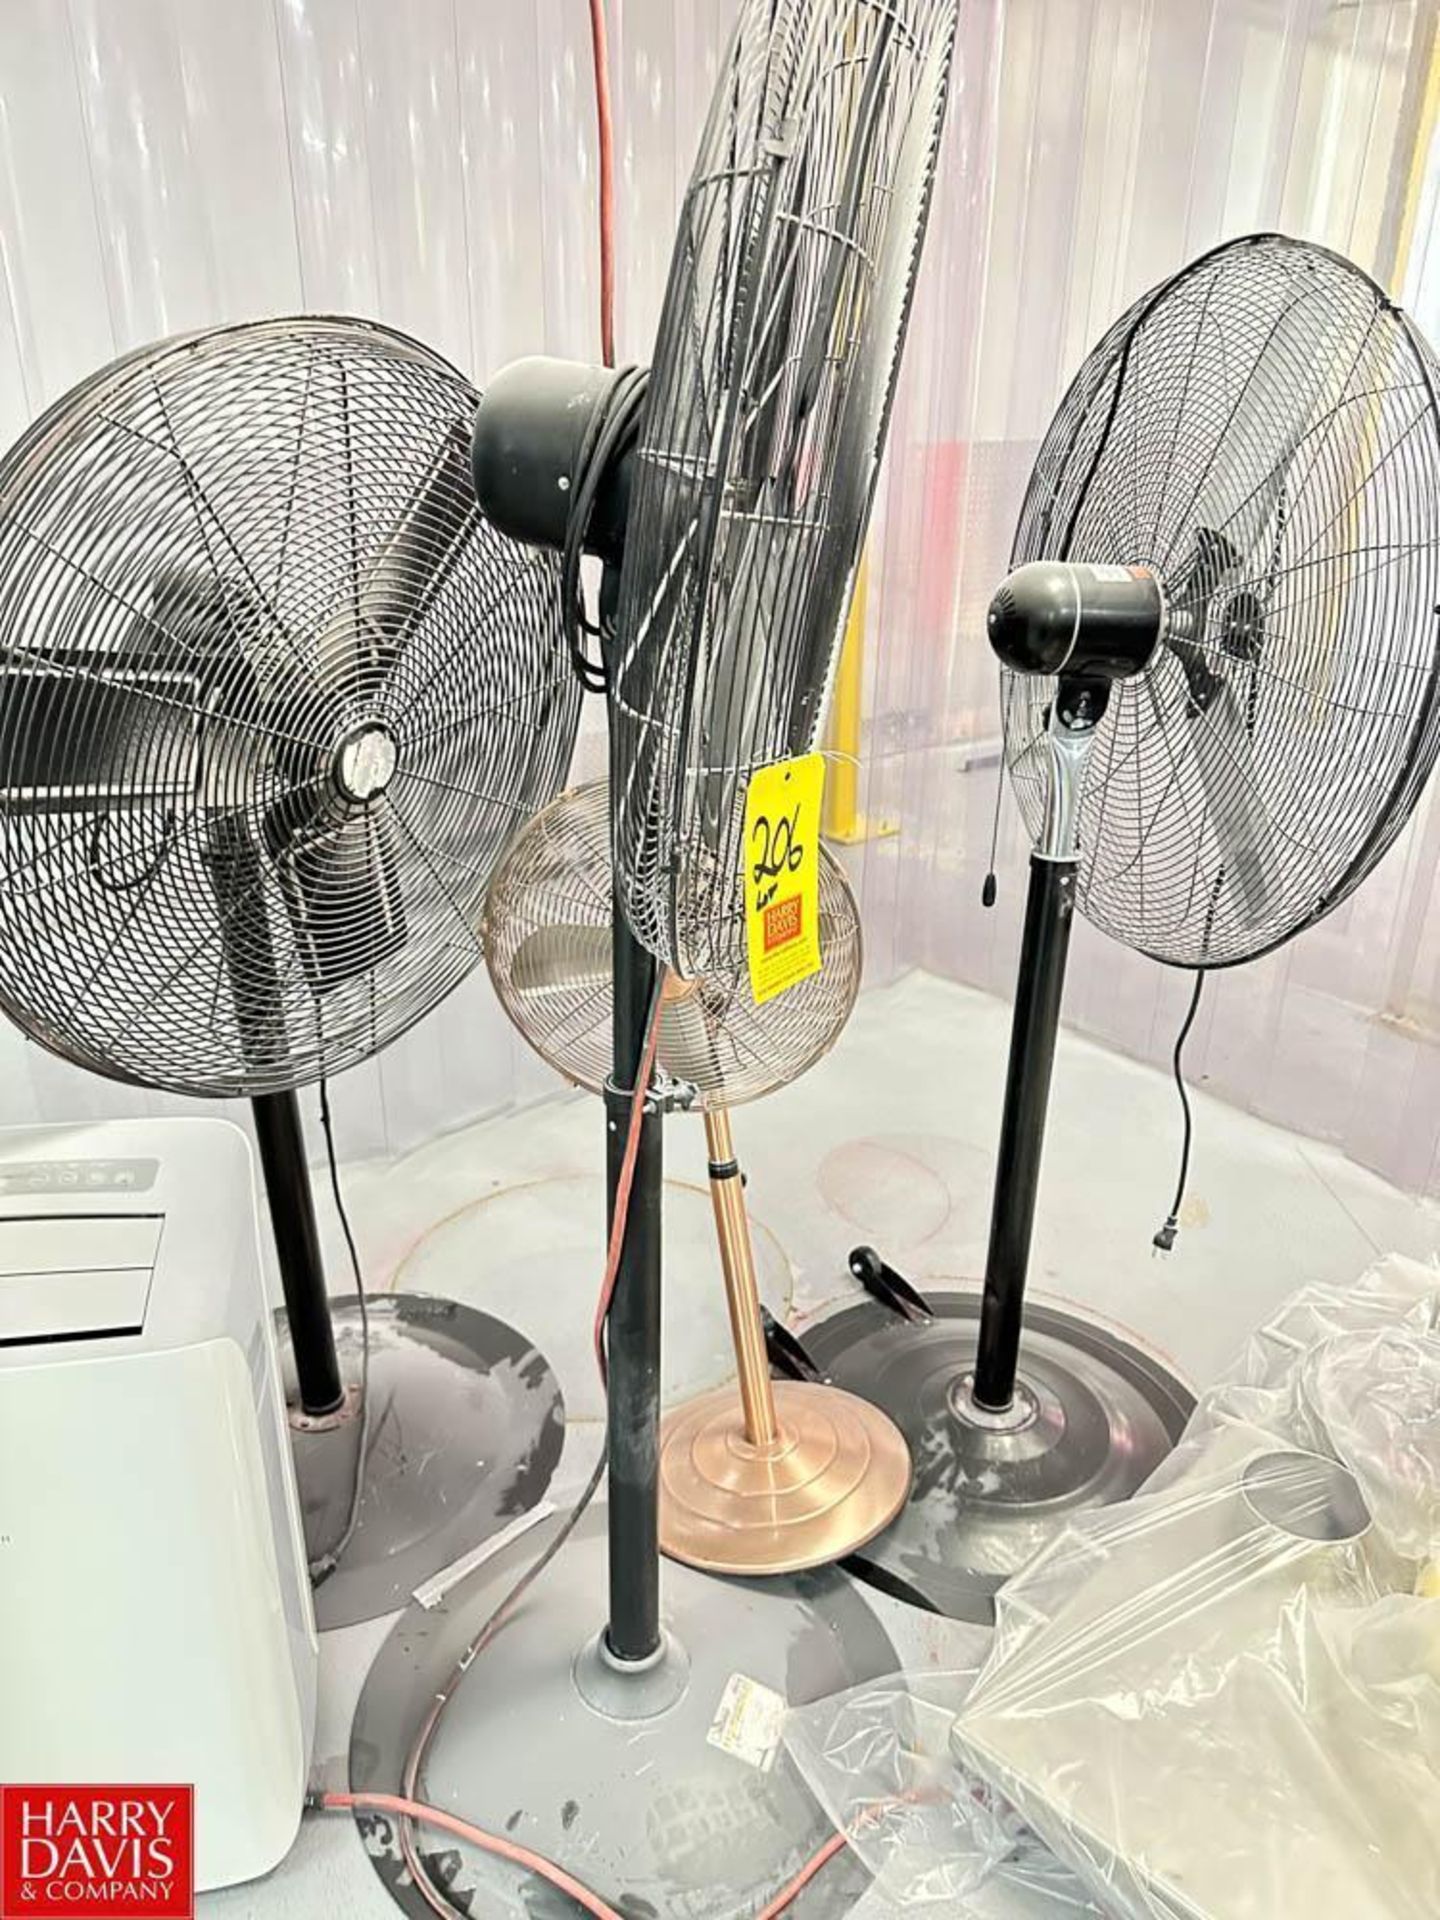 (4) Pedestal Fans and Dehumidifiers - Rigging Fee: $50